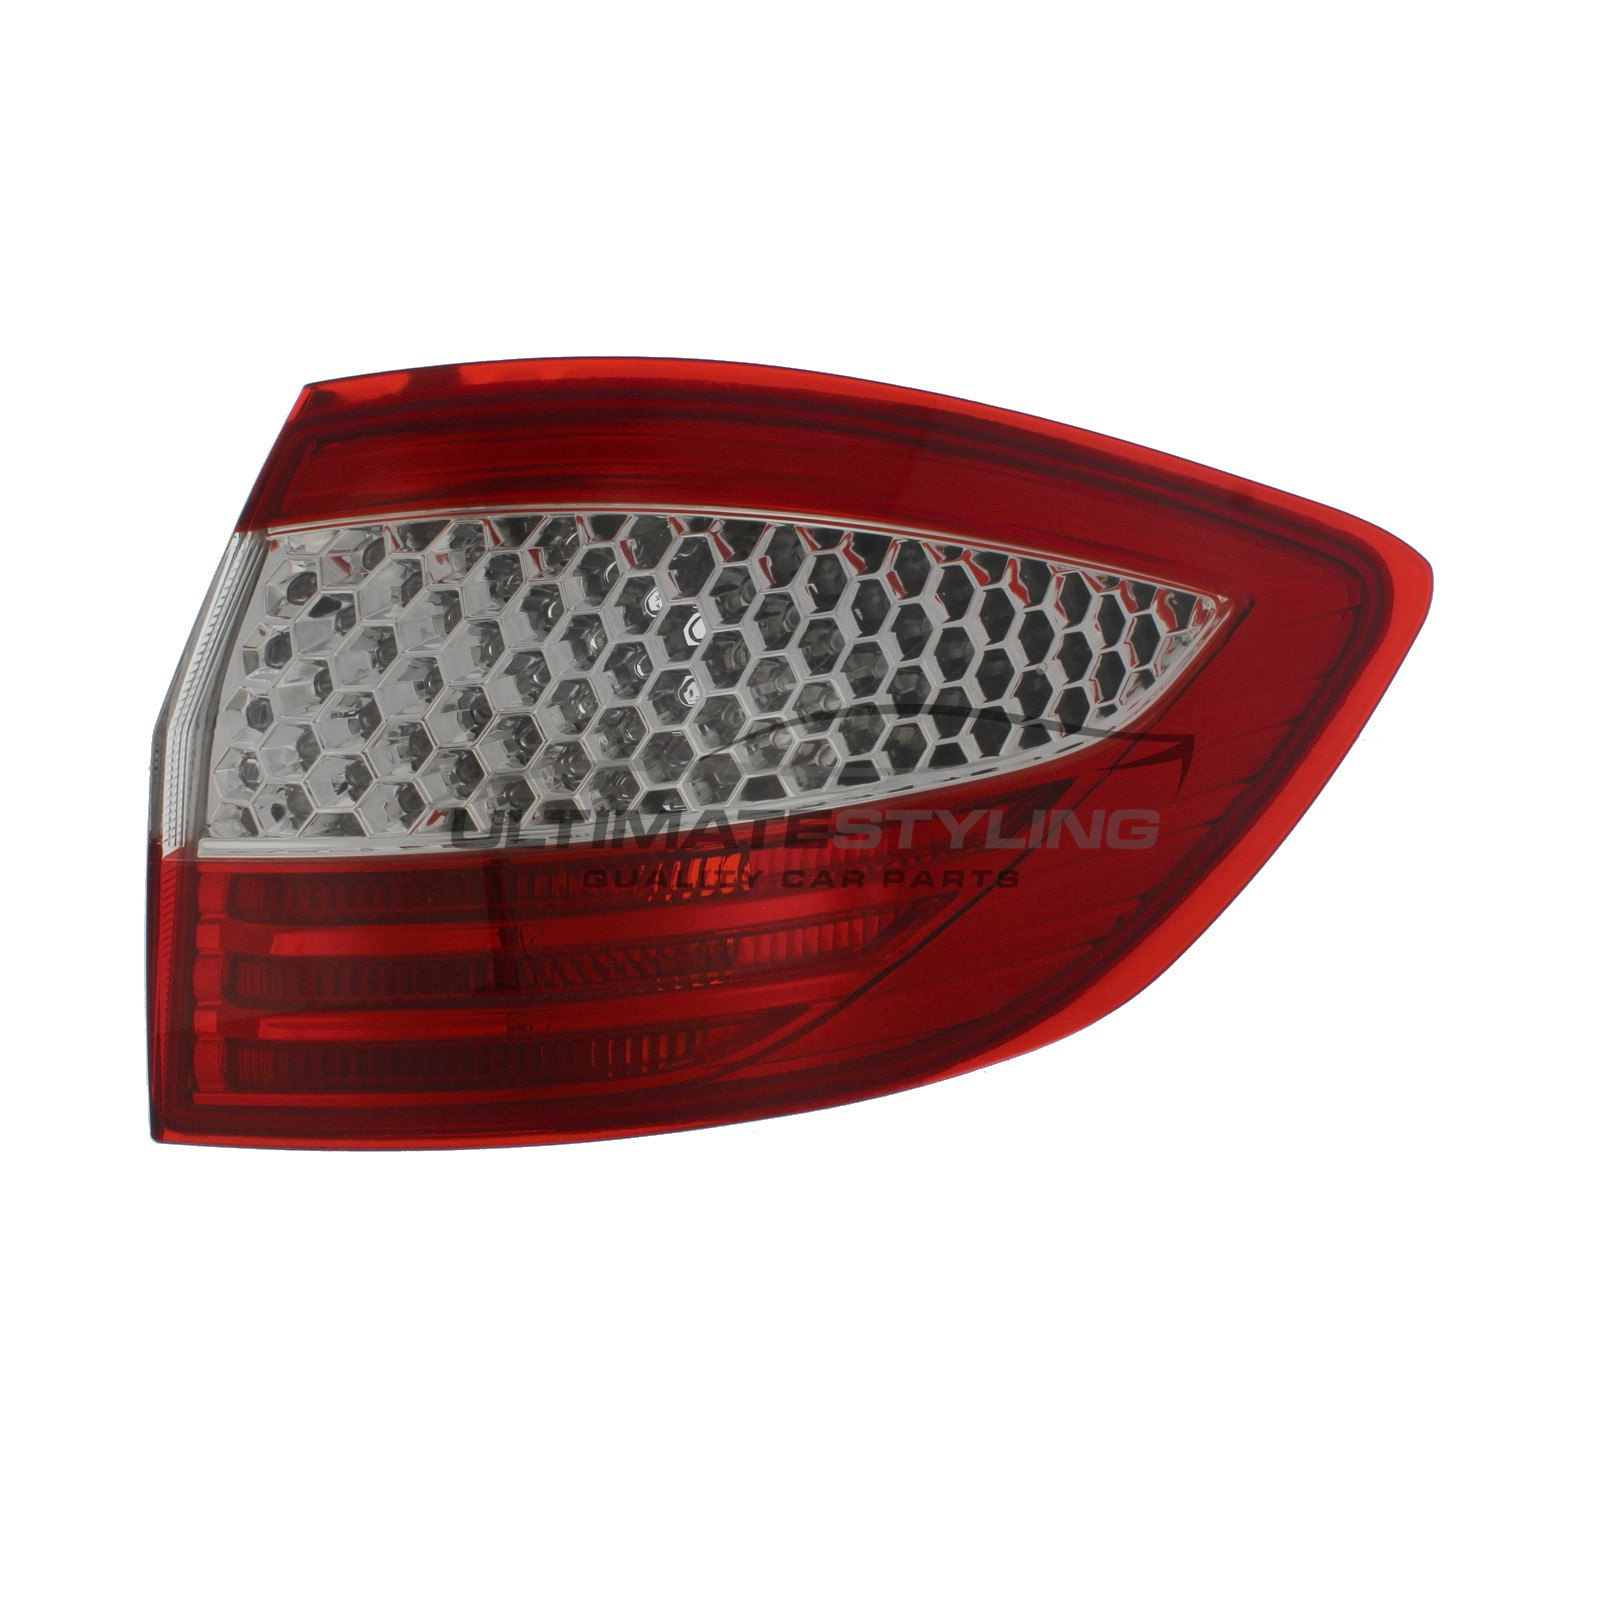 Rear Light / Tail Light for Ford Mondeo